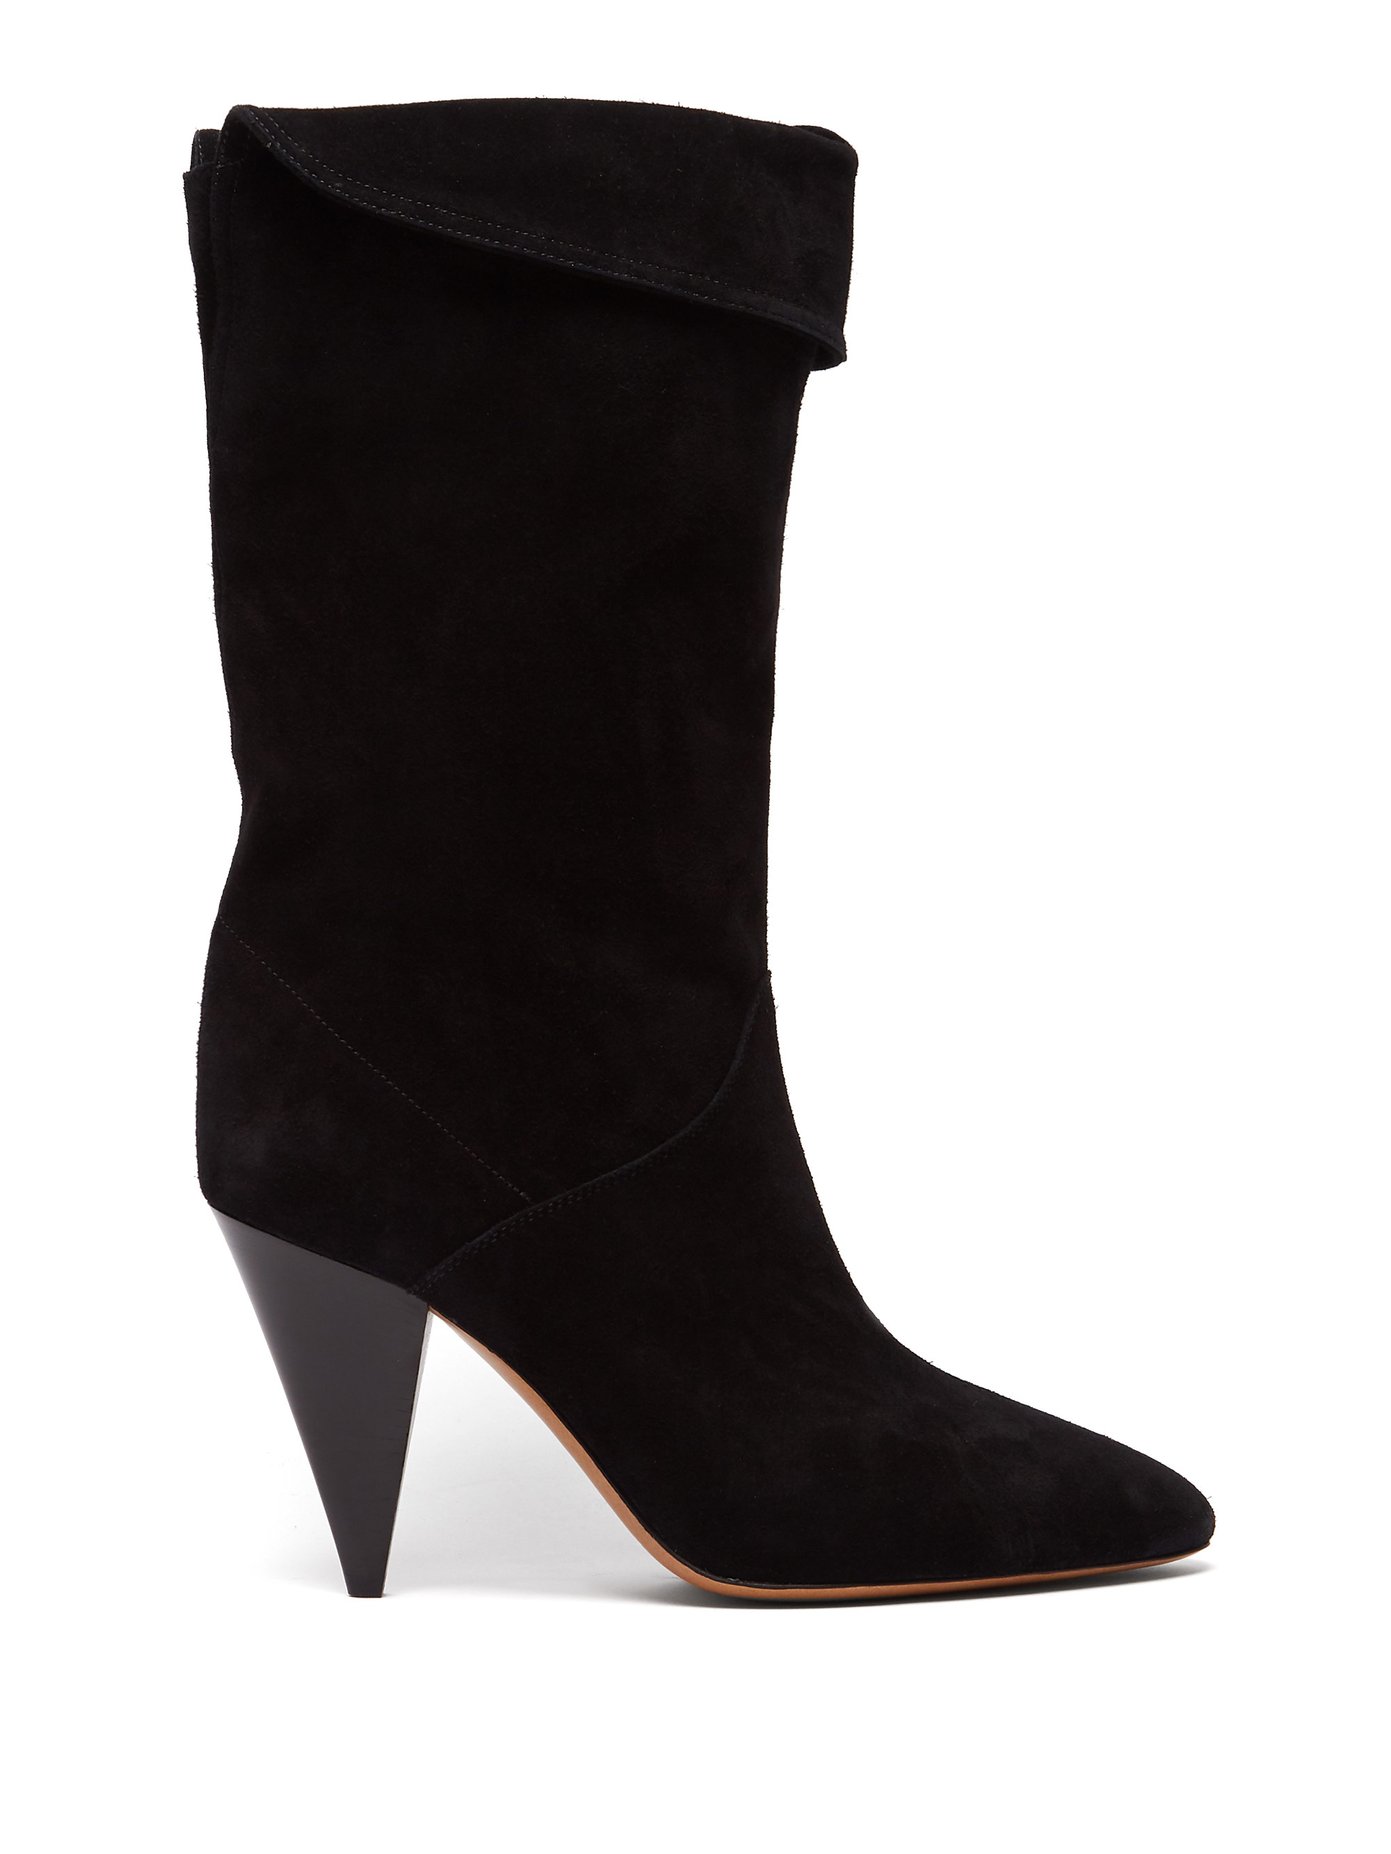 black suede slouch boots uk